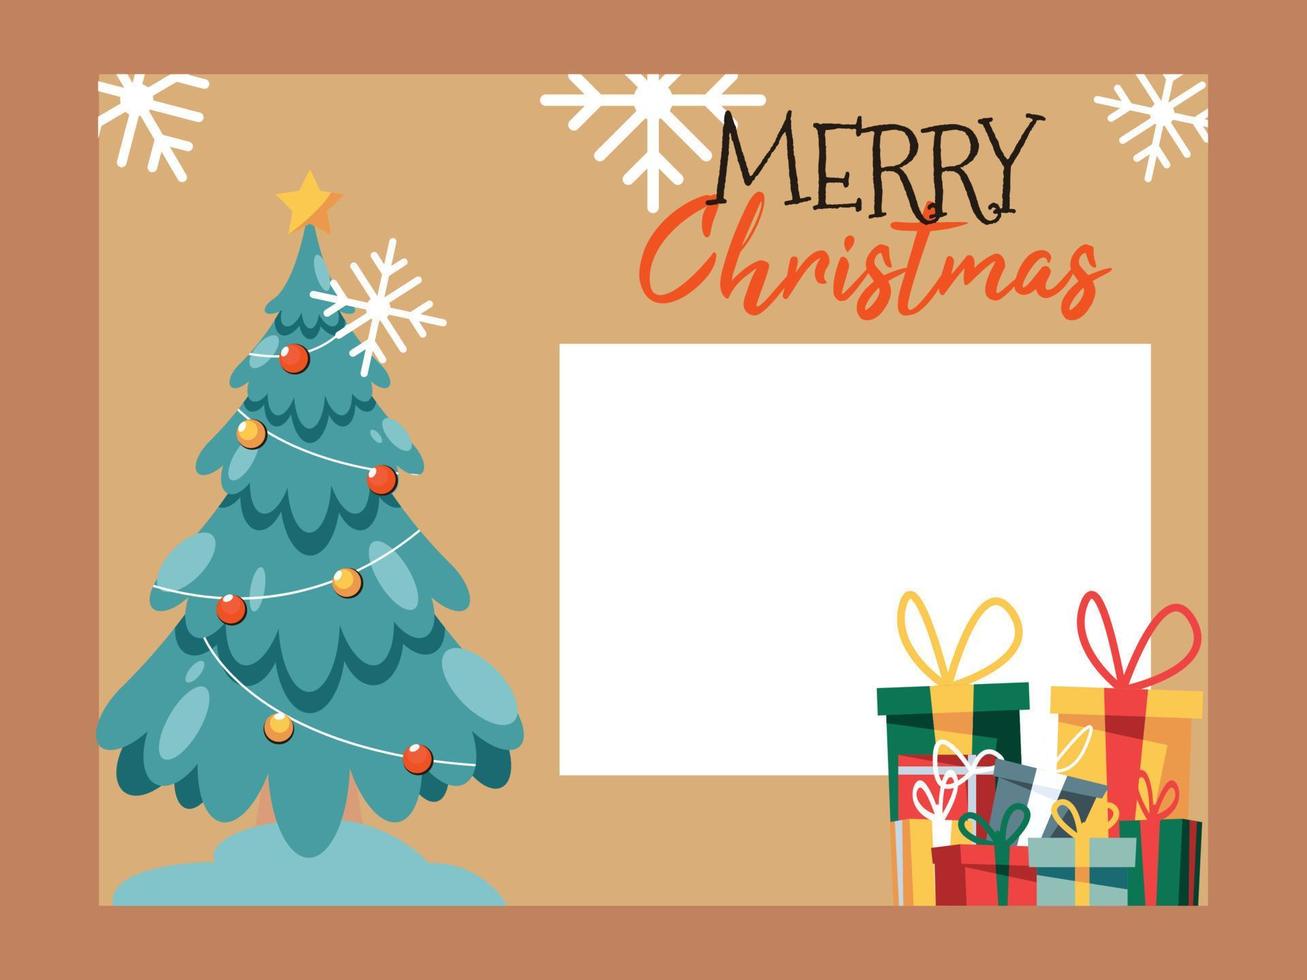 Merry Christmas and Happy New Year Fun Greeting cards with christmas tree and present vector